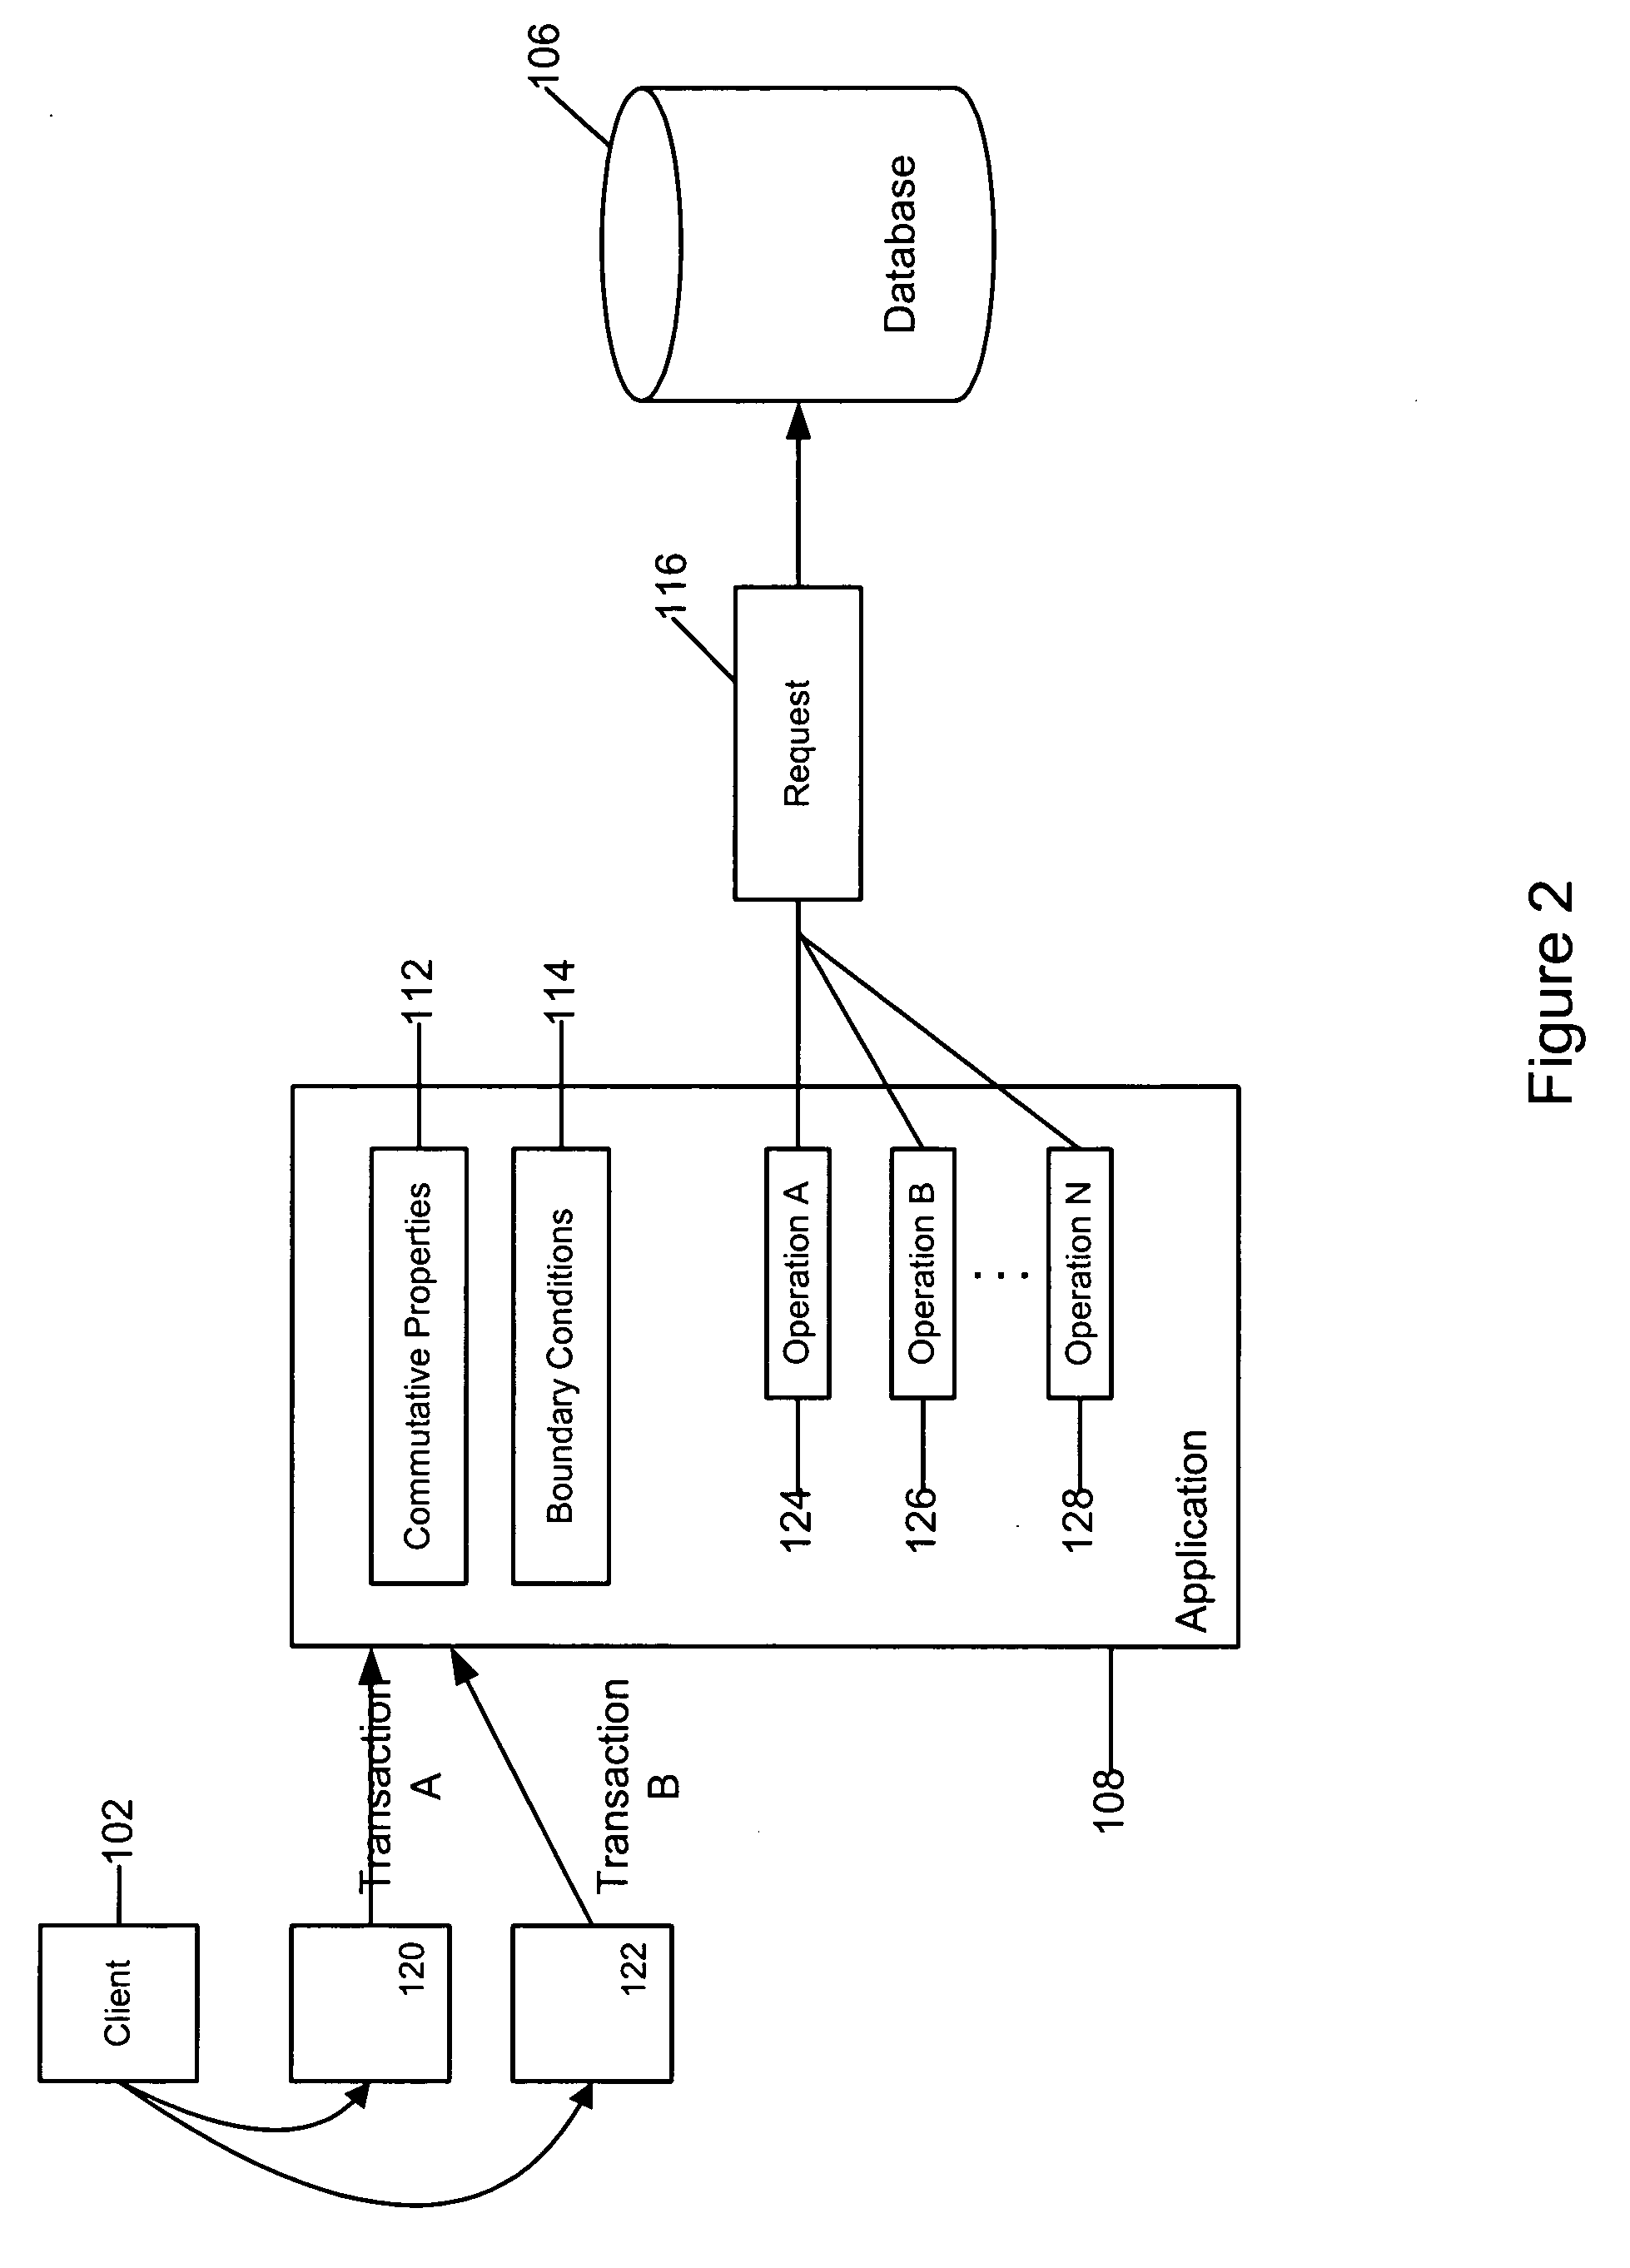 System and method for performing commutative operations in data access systems